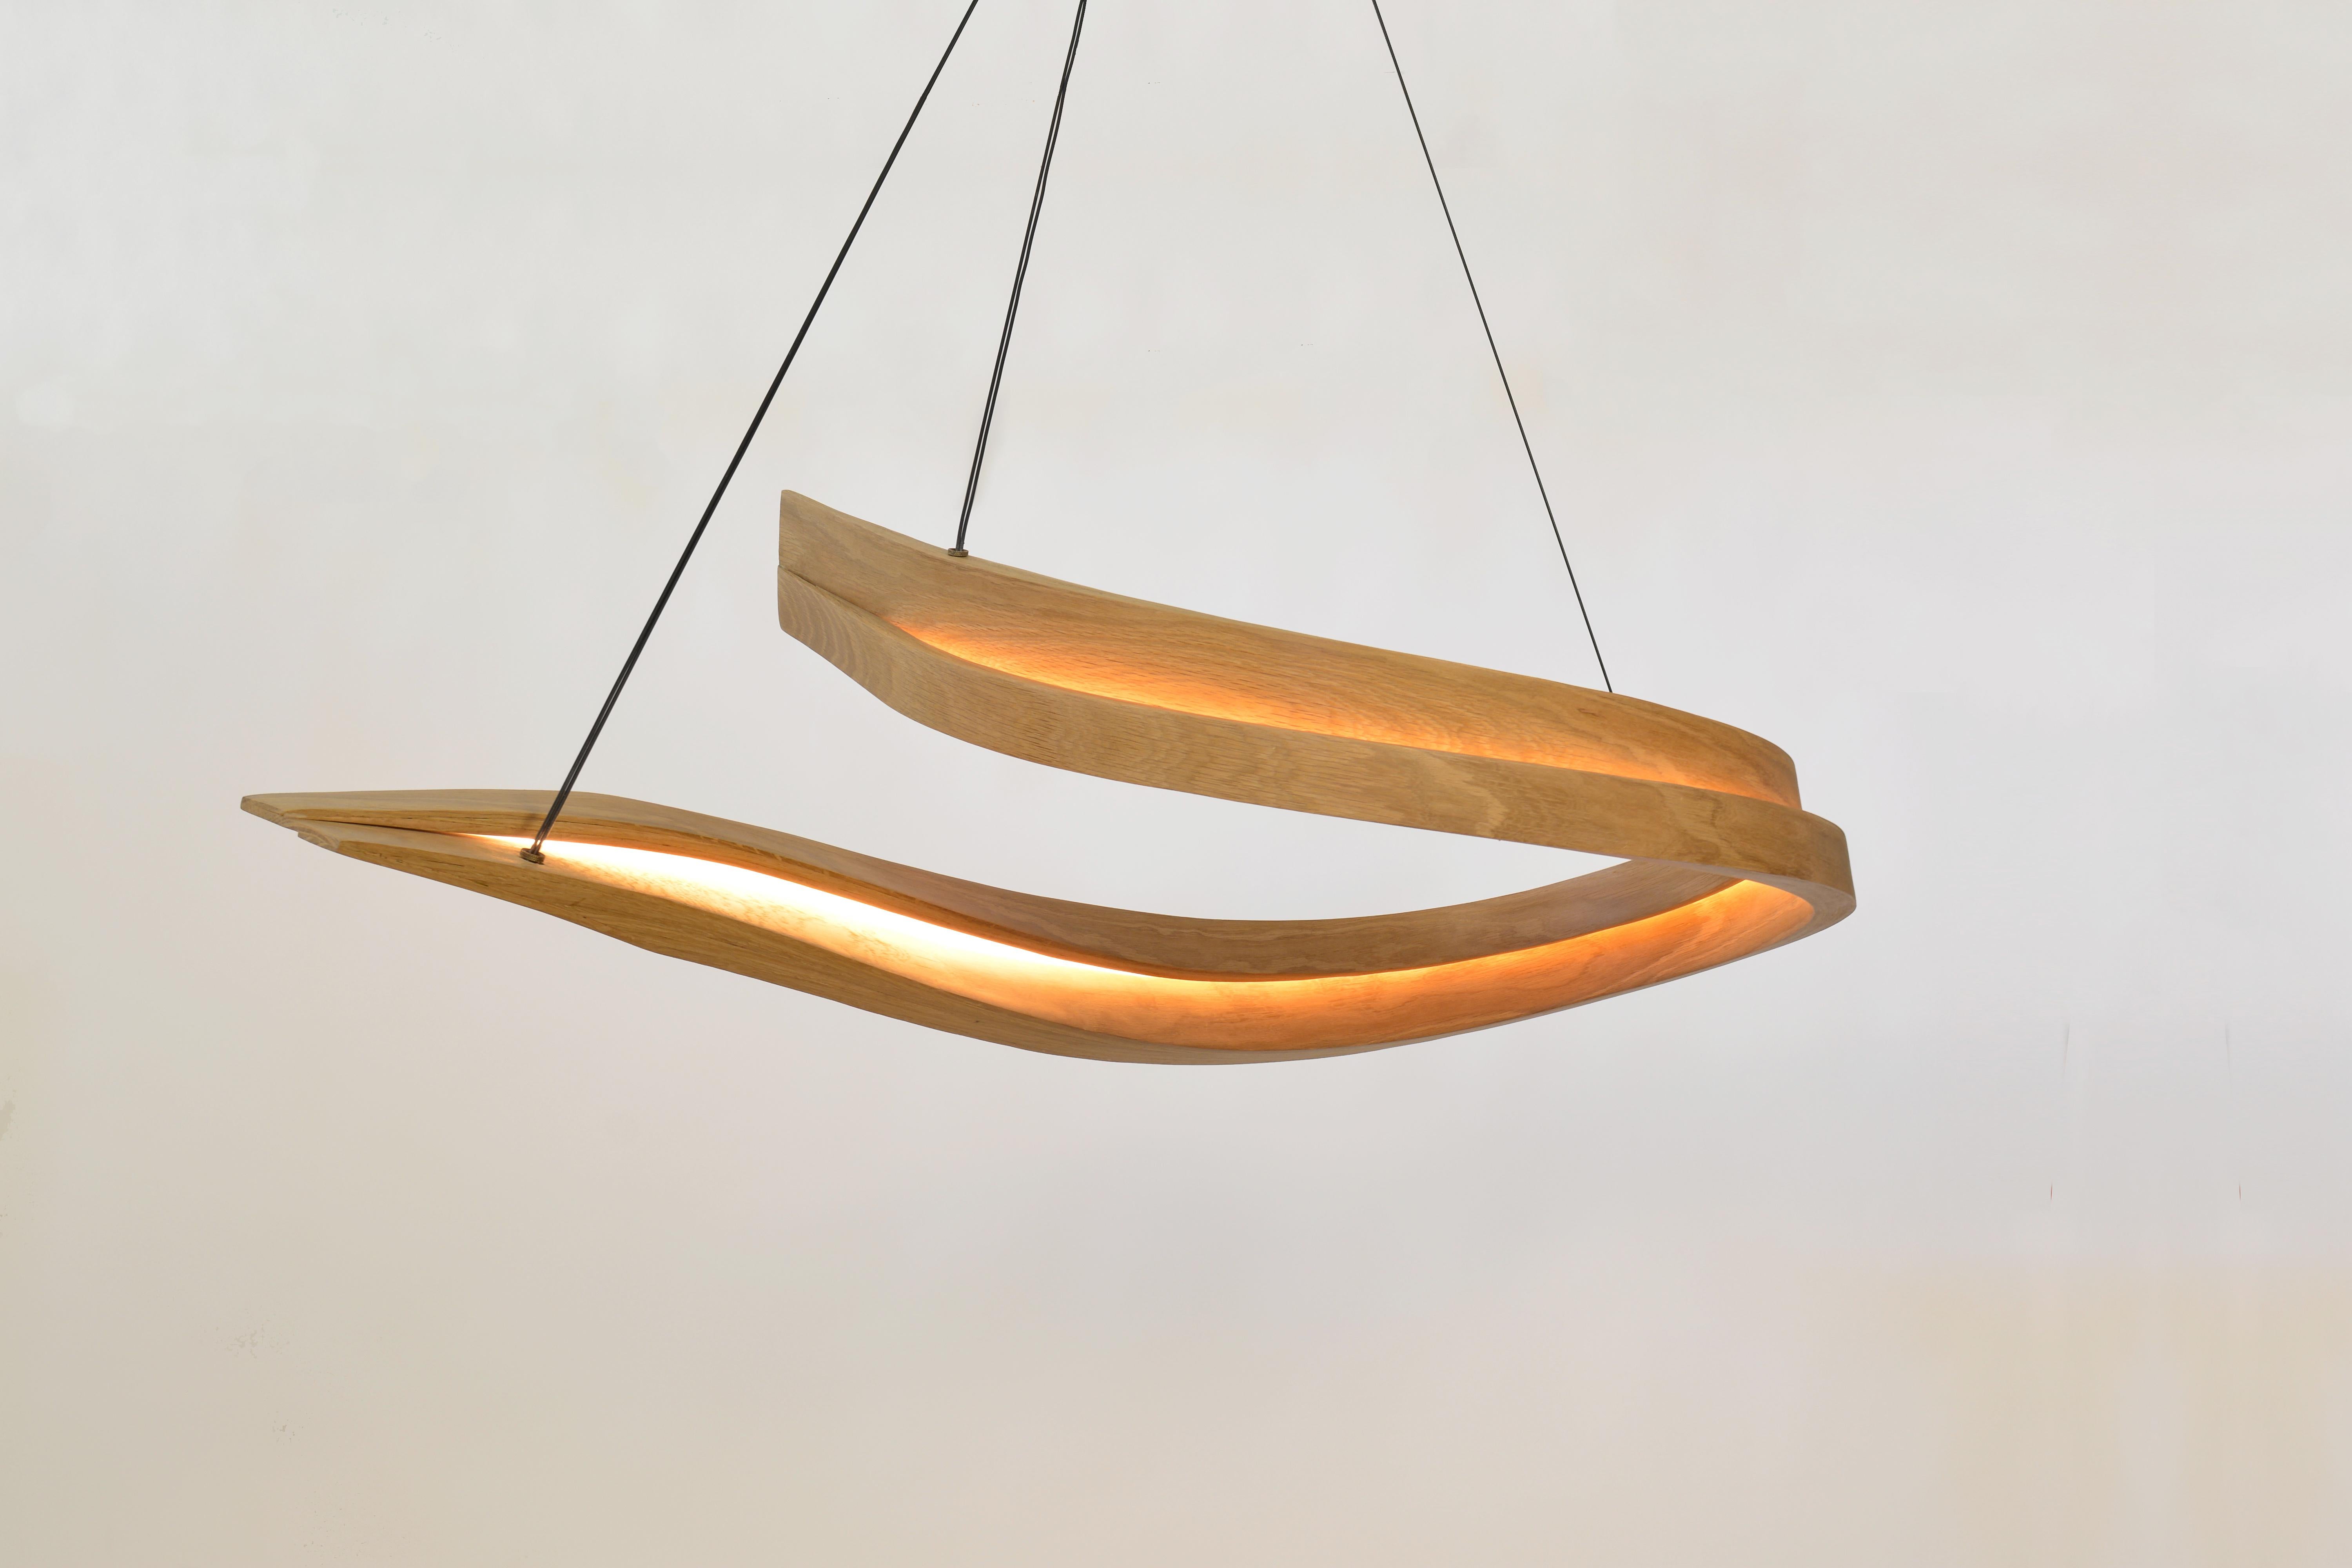 The Invert is a dual light-faced freeform pendant formed from wood and high-output dimmable LED. Opposite facing light channels on each major face create a balanced glow that compliments the freeform curve to create an even distribution of light